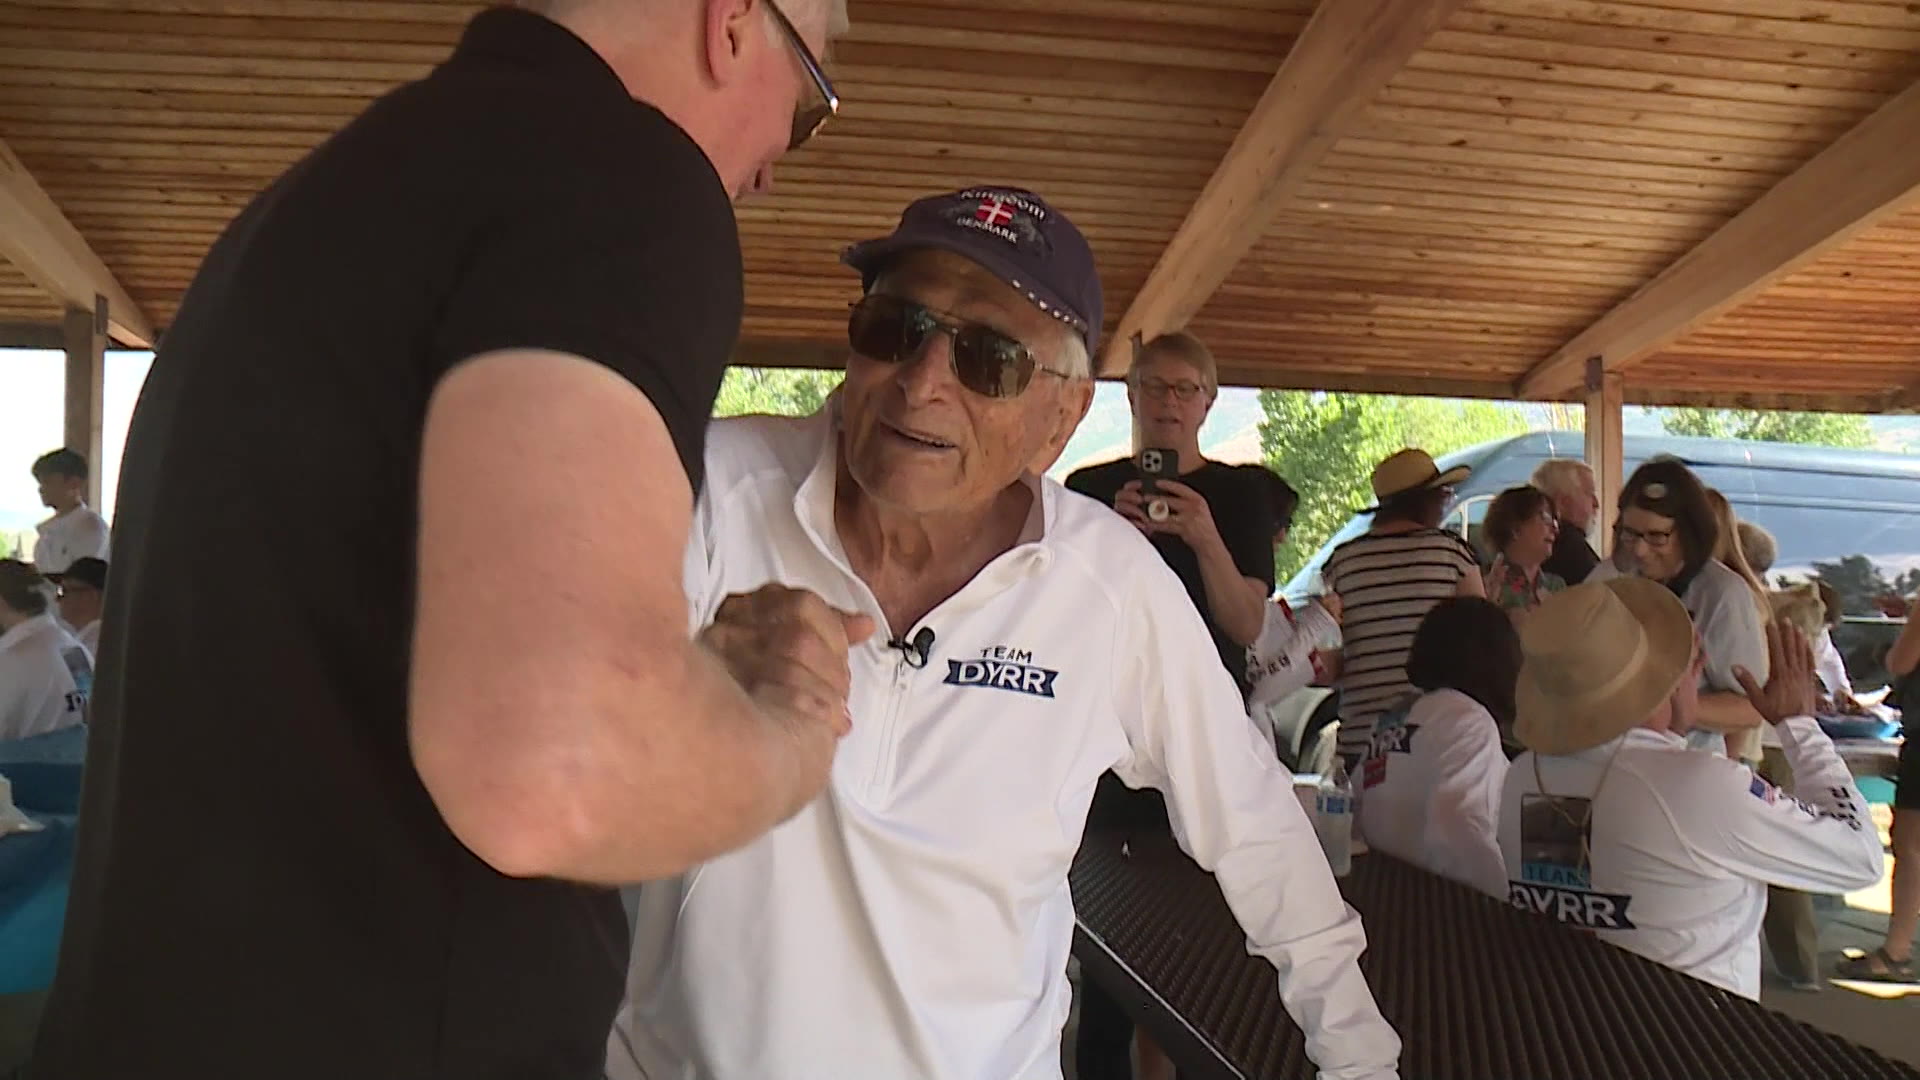 94-year-old Ejnar Dyrr getting ready for setting his new record. (KSL TV)...